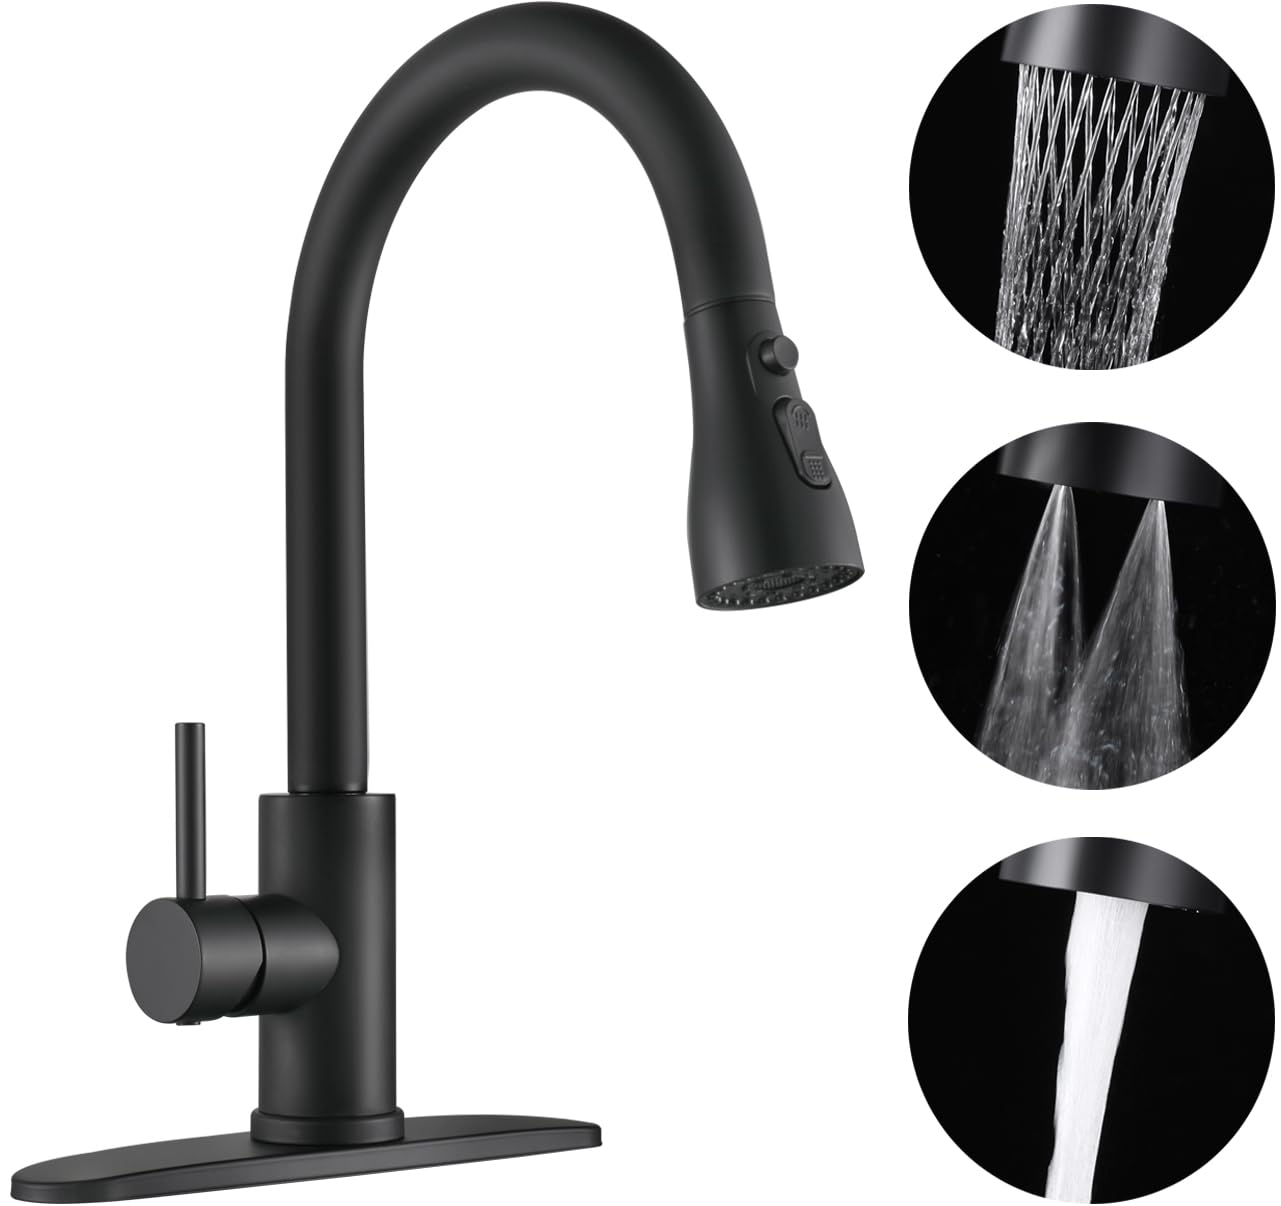 ESOW High Arc Kitchen Faucet with Pull Down Sprayer, Single Handle Kitchen Sink Faucet with Deck Plate, 3 Function Watering Modes Commercial Modern rv, SUS304 Stainless Steel Matte Black Finish